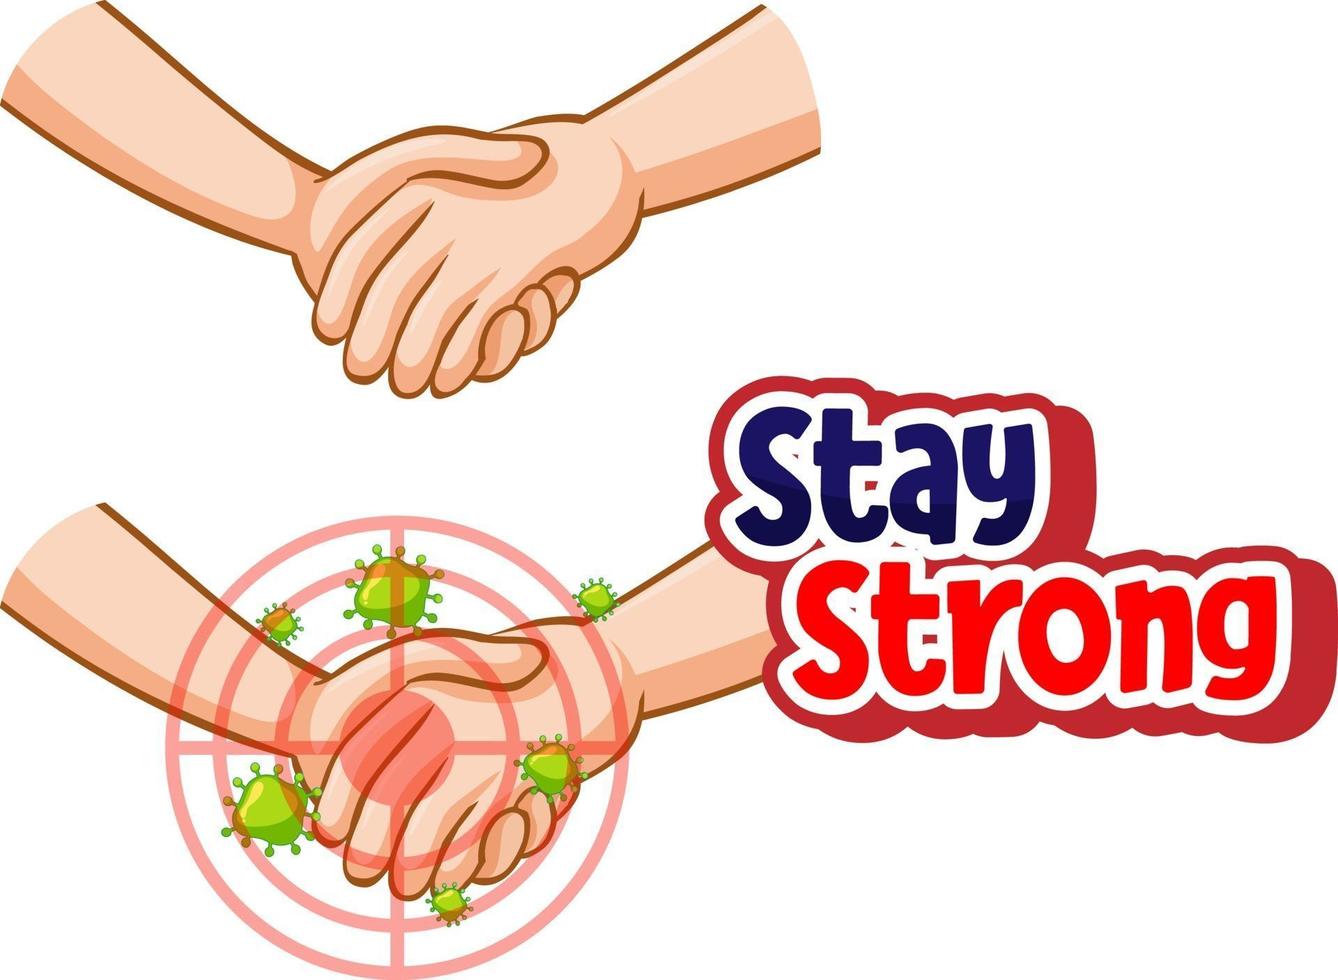 Stay Strong font design with virus spreads from shaking hands on white background vector